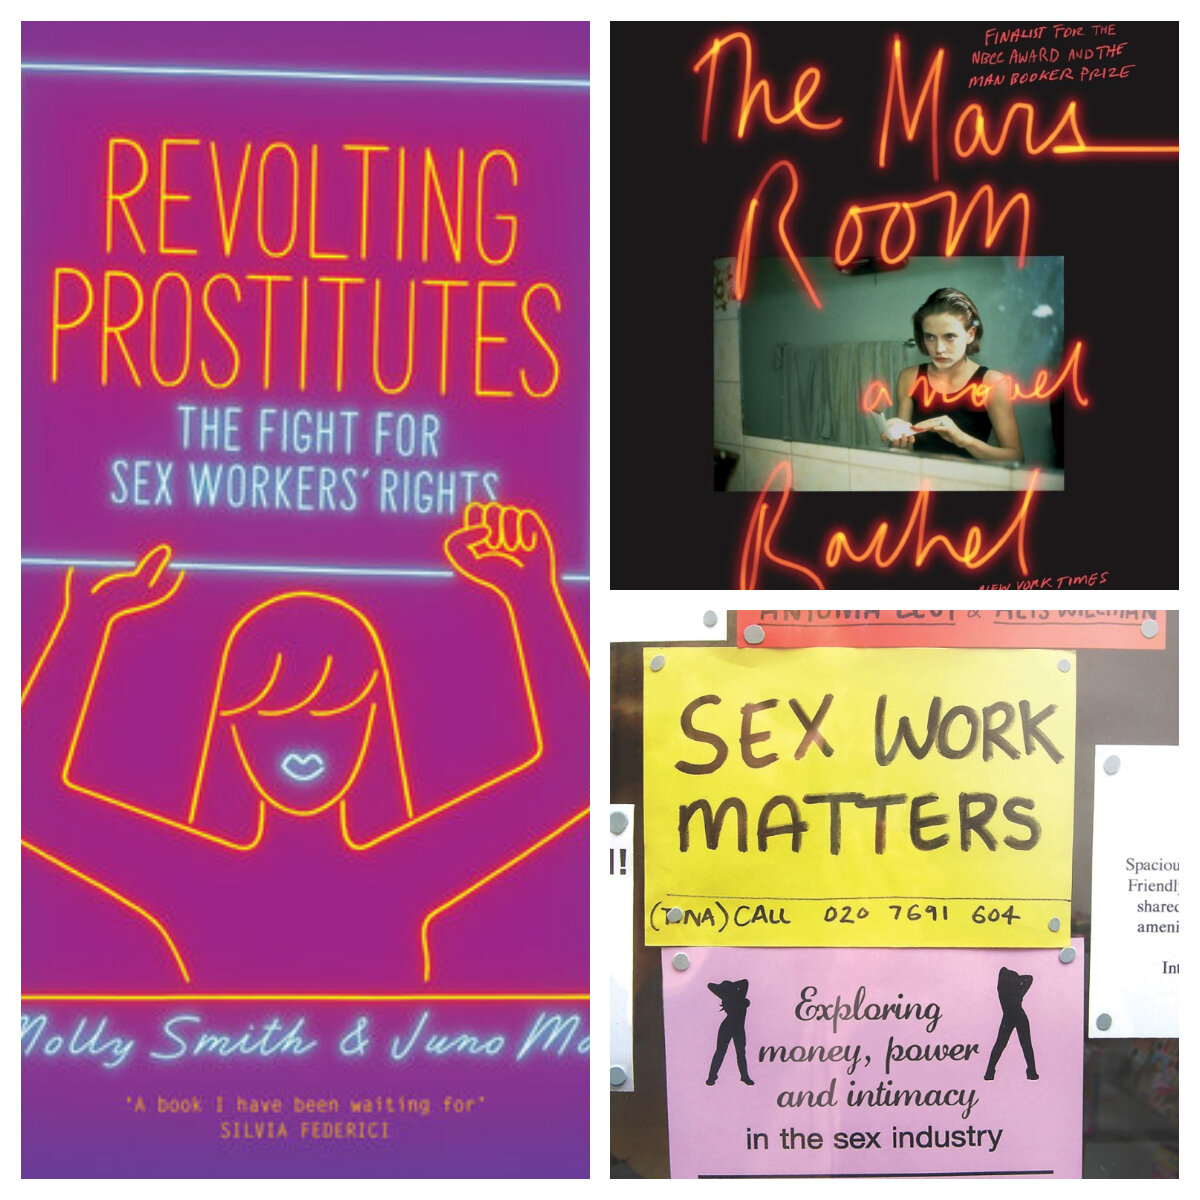 What we read 6 titles about sex work — The Mistress of the House of Books